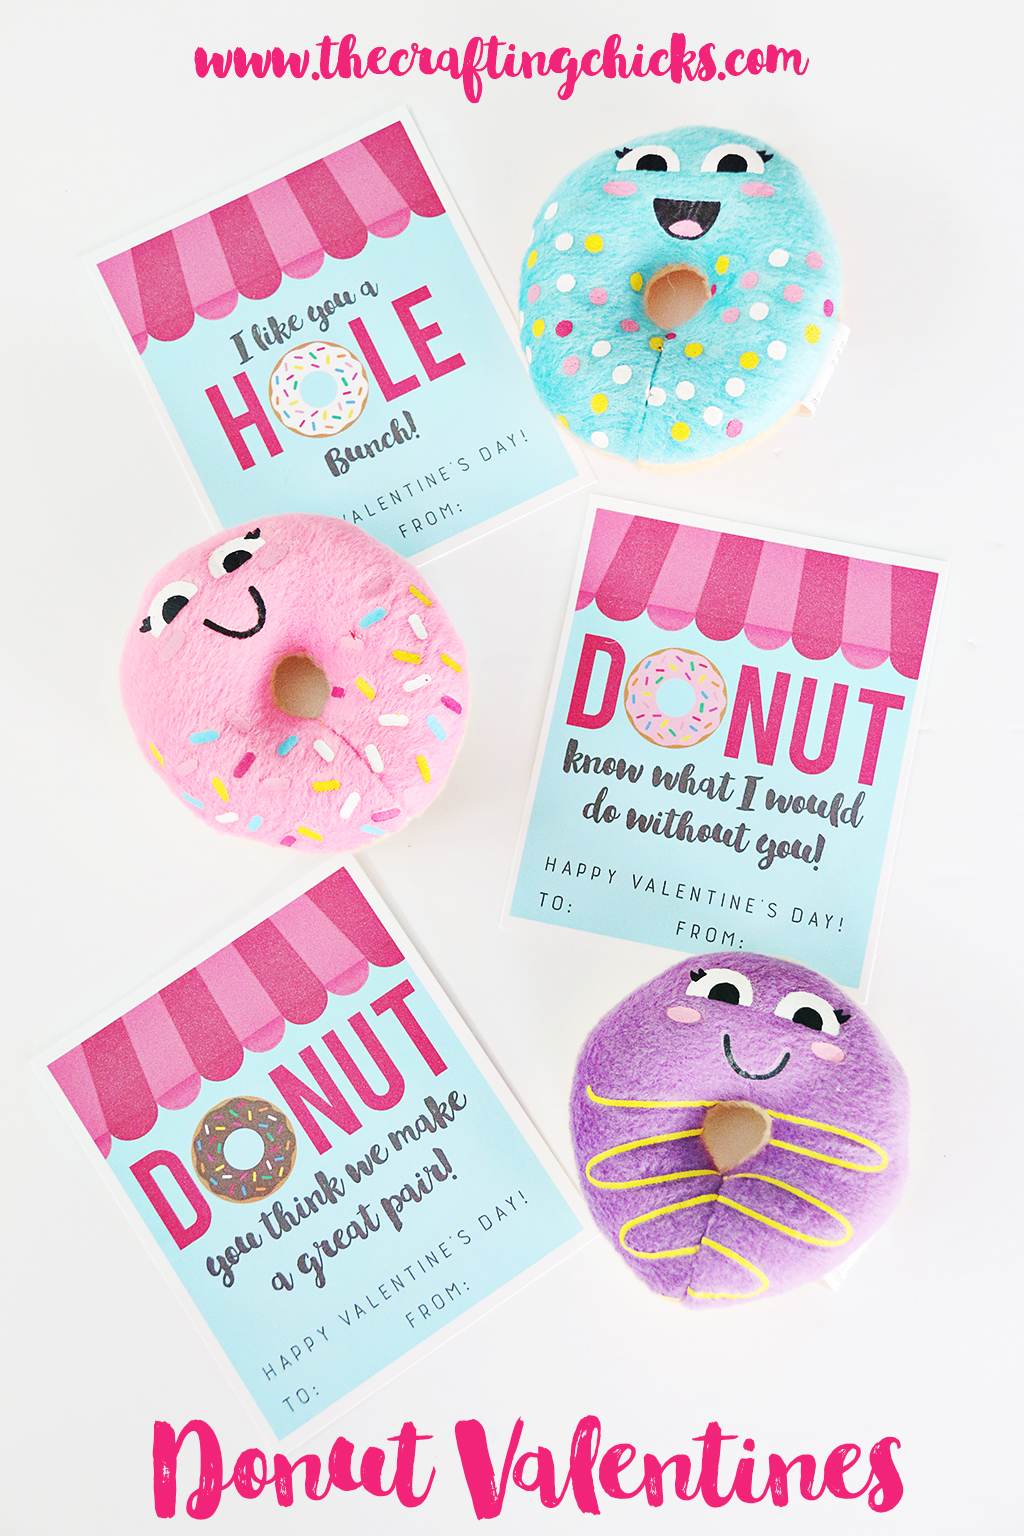 Donut Valentine Printables - A fun class valentine or try adding these tags to a box of donuts for teachers, neighbors or friends!